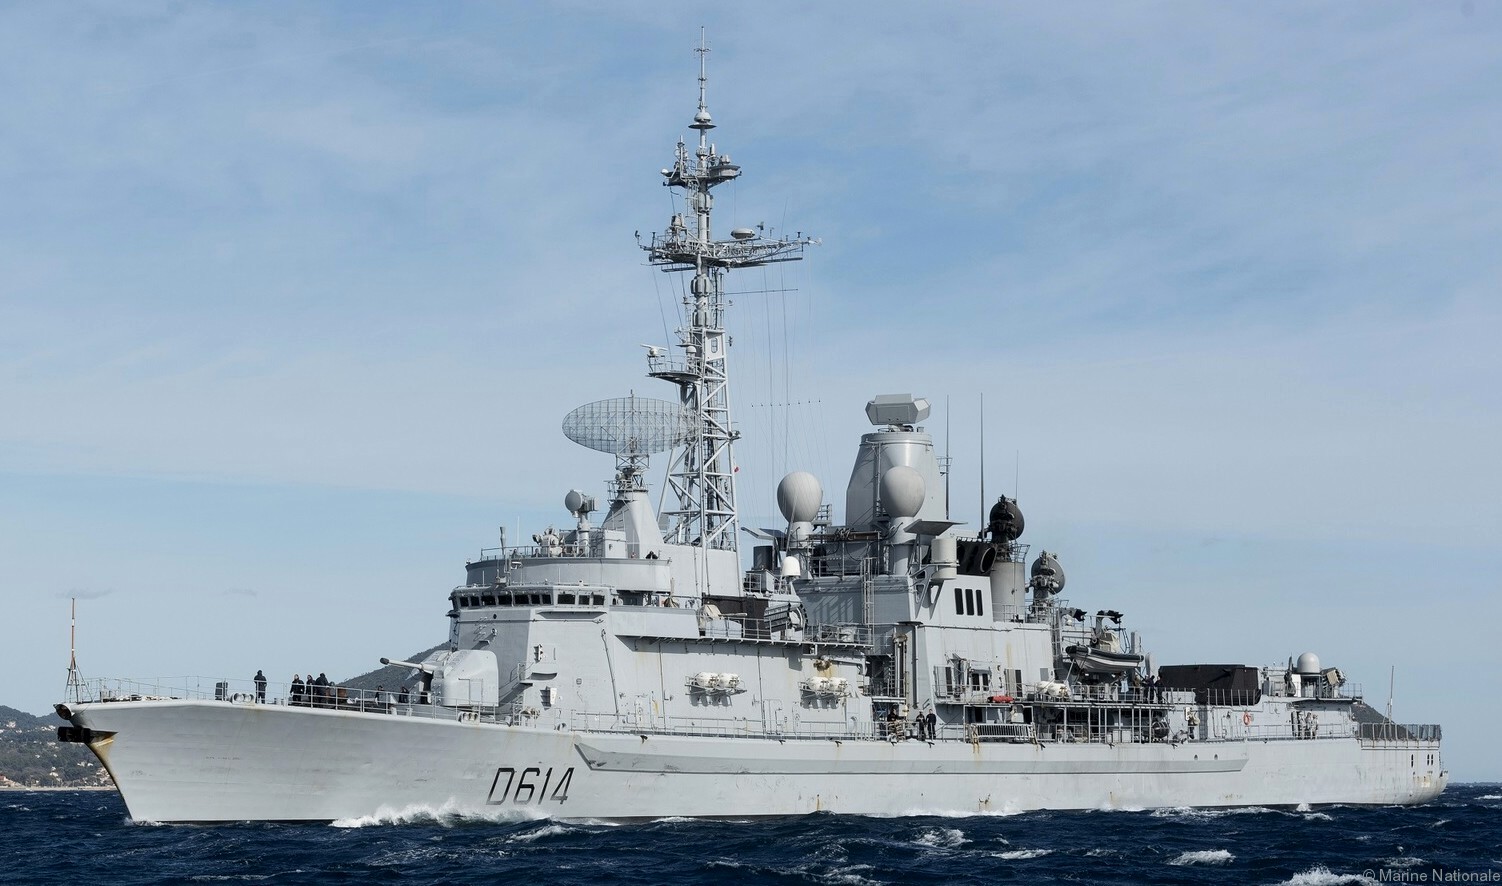 d-614 fs cassard f70aa class guided missile frigate ffgh ddg french navy marine nationale 16x dcns lorient